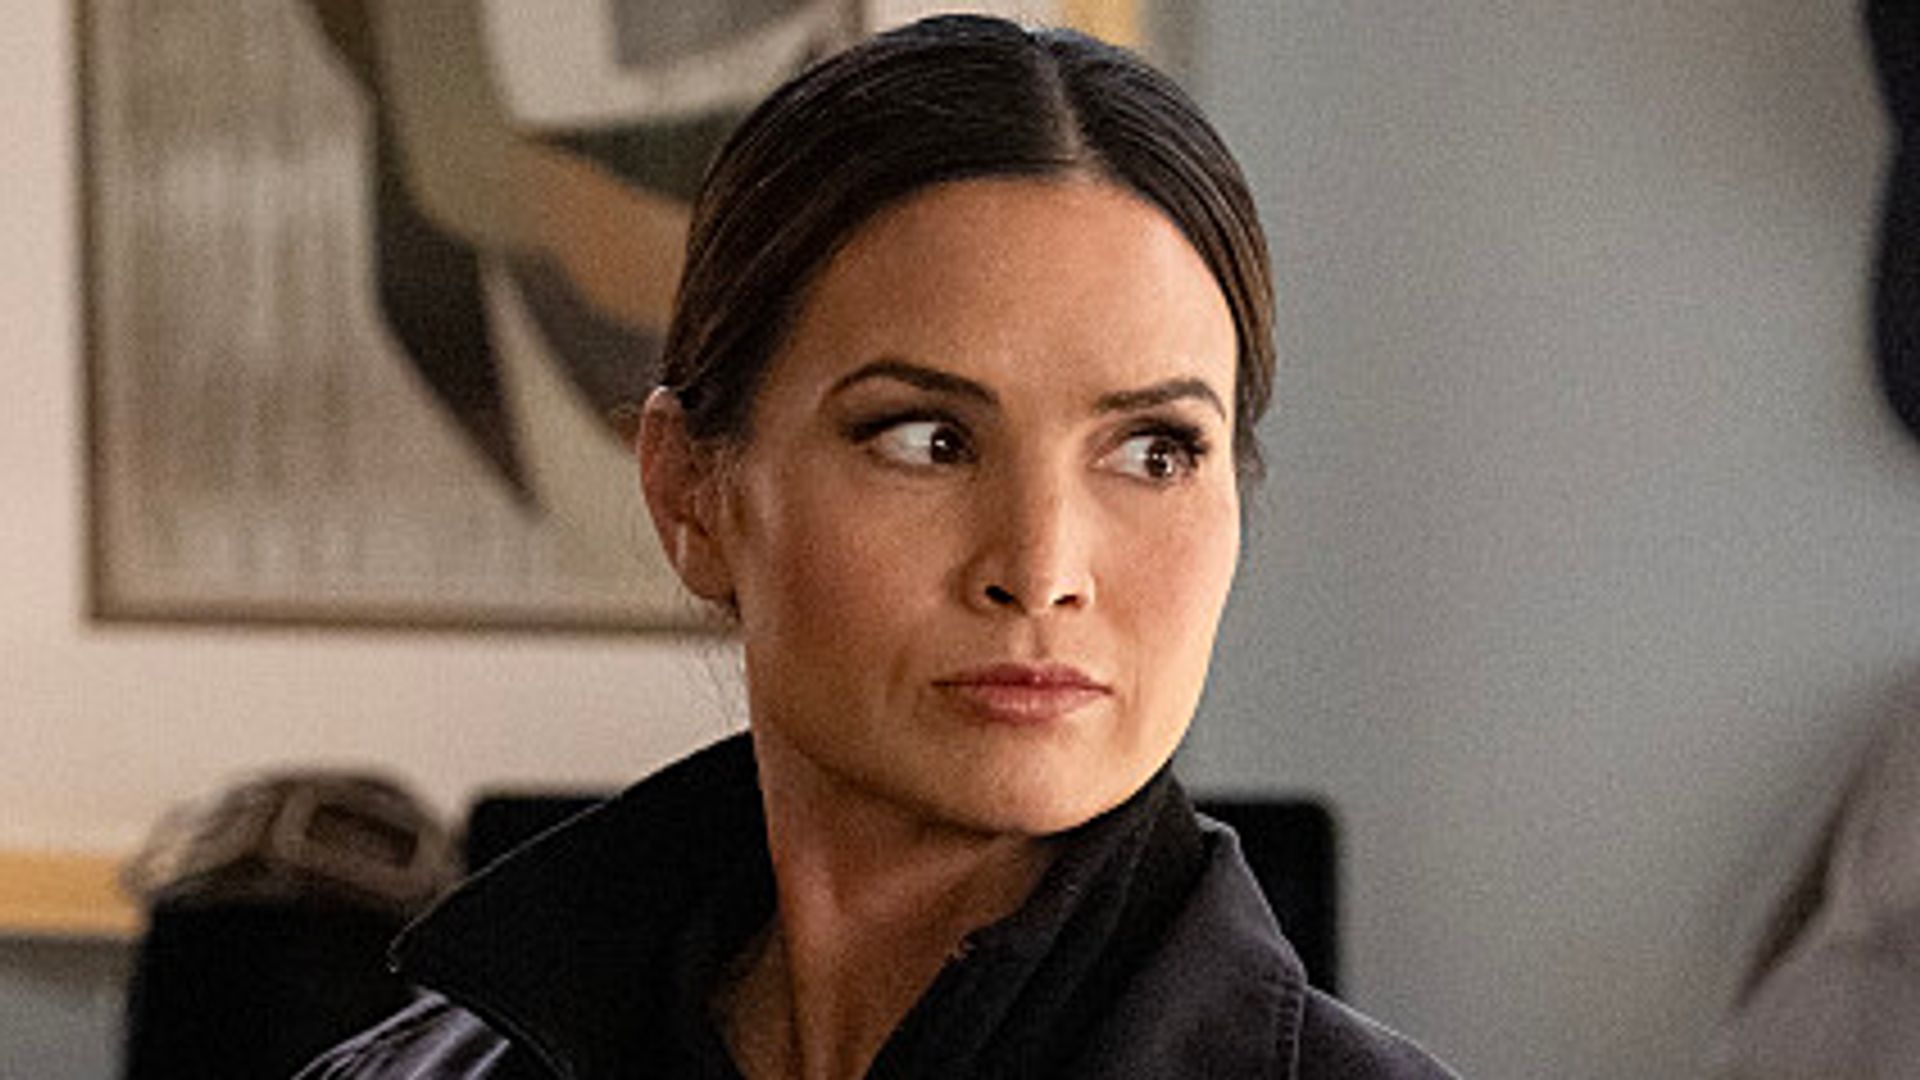 NCIS teases Katrina Law's departure in season 21 finale – and fans aren't happy